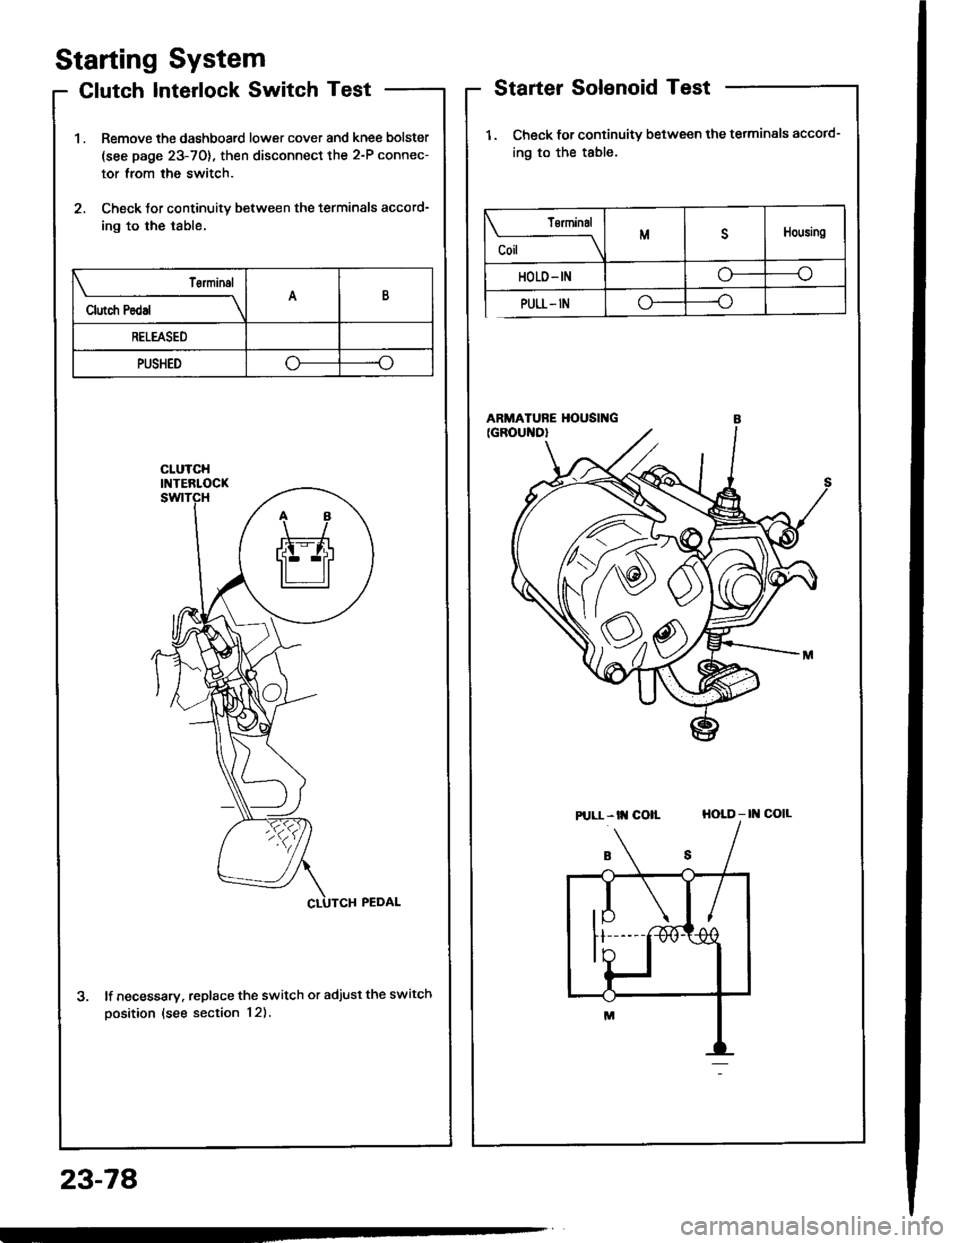 HONDA INTEGRA 1994 4.G User Guide Starting System
Clutch Interlock Switch Test
1 . Remove the dashboard lower cover and knee bolster
(see page 23-70), then disconnect the 2-P connec-
tor from the switch.
2. Check tor continuity betwee